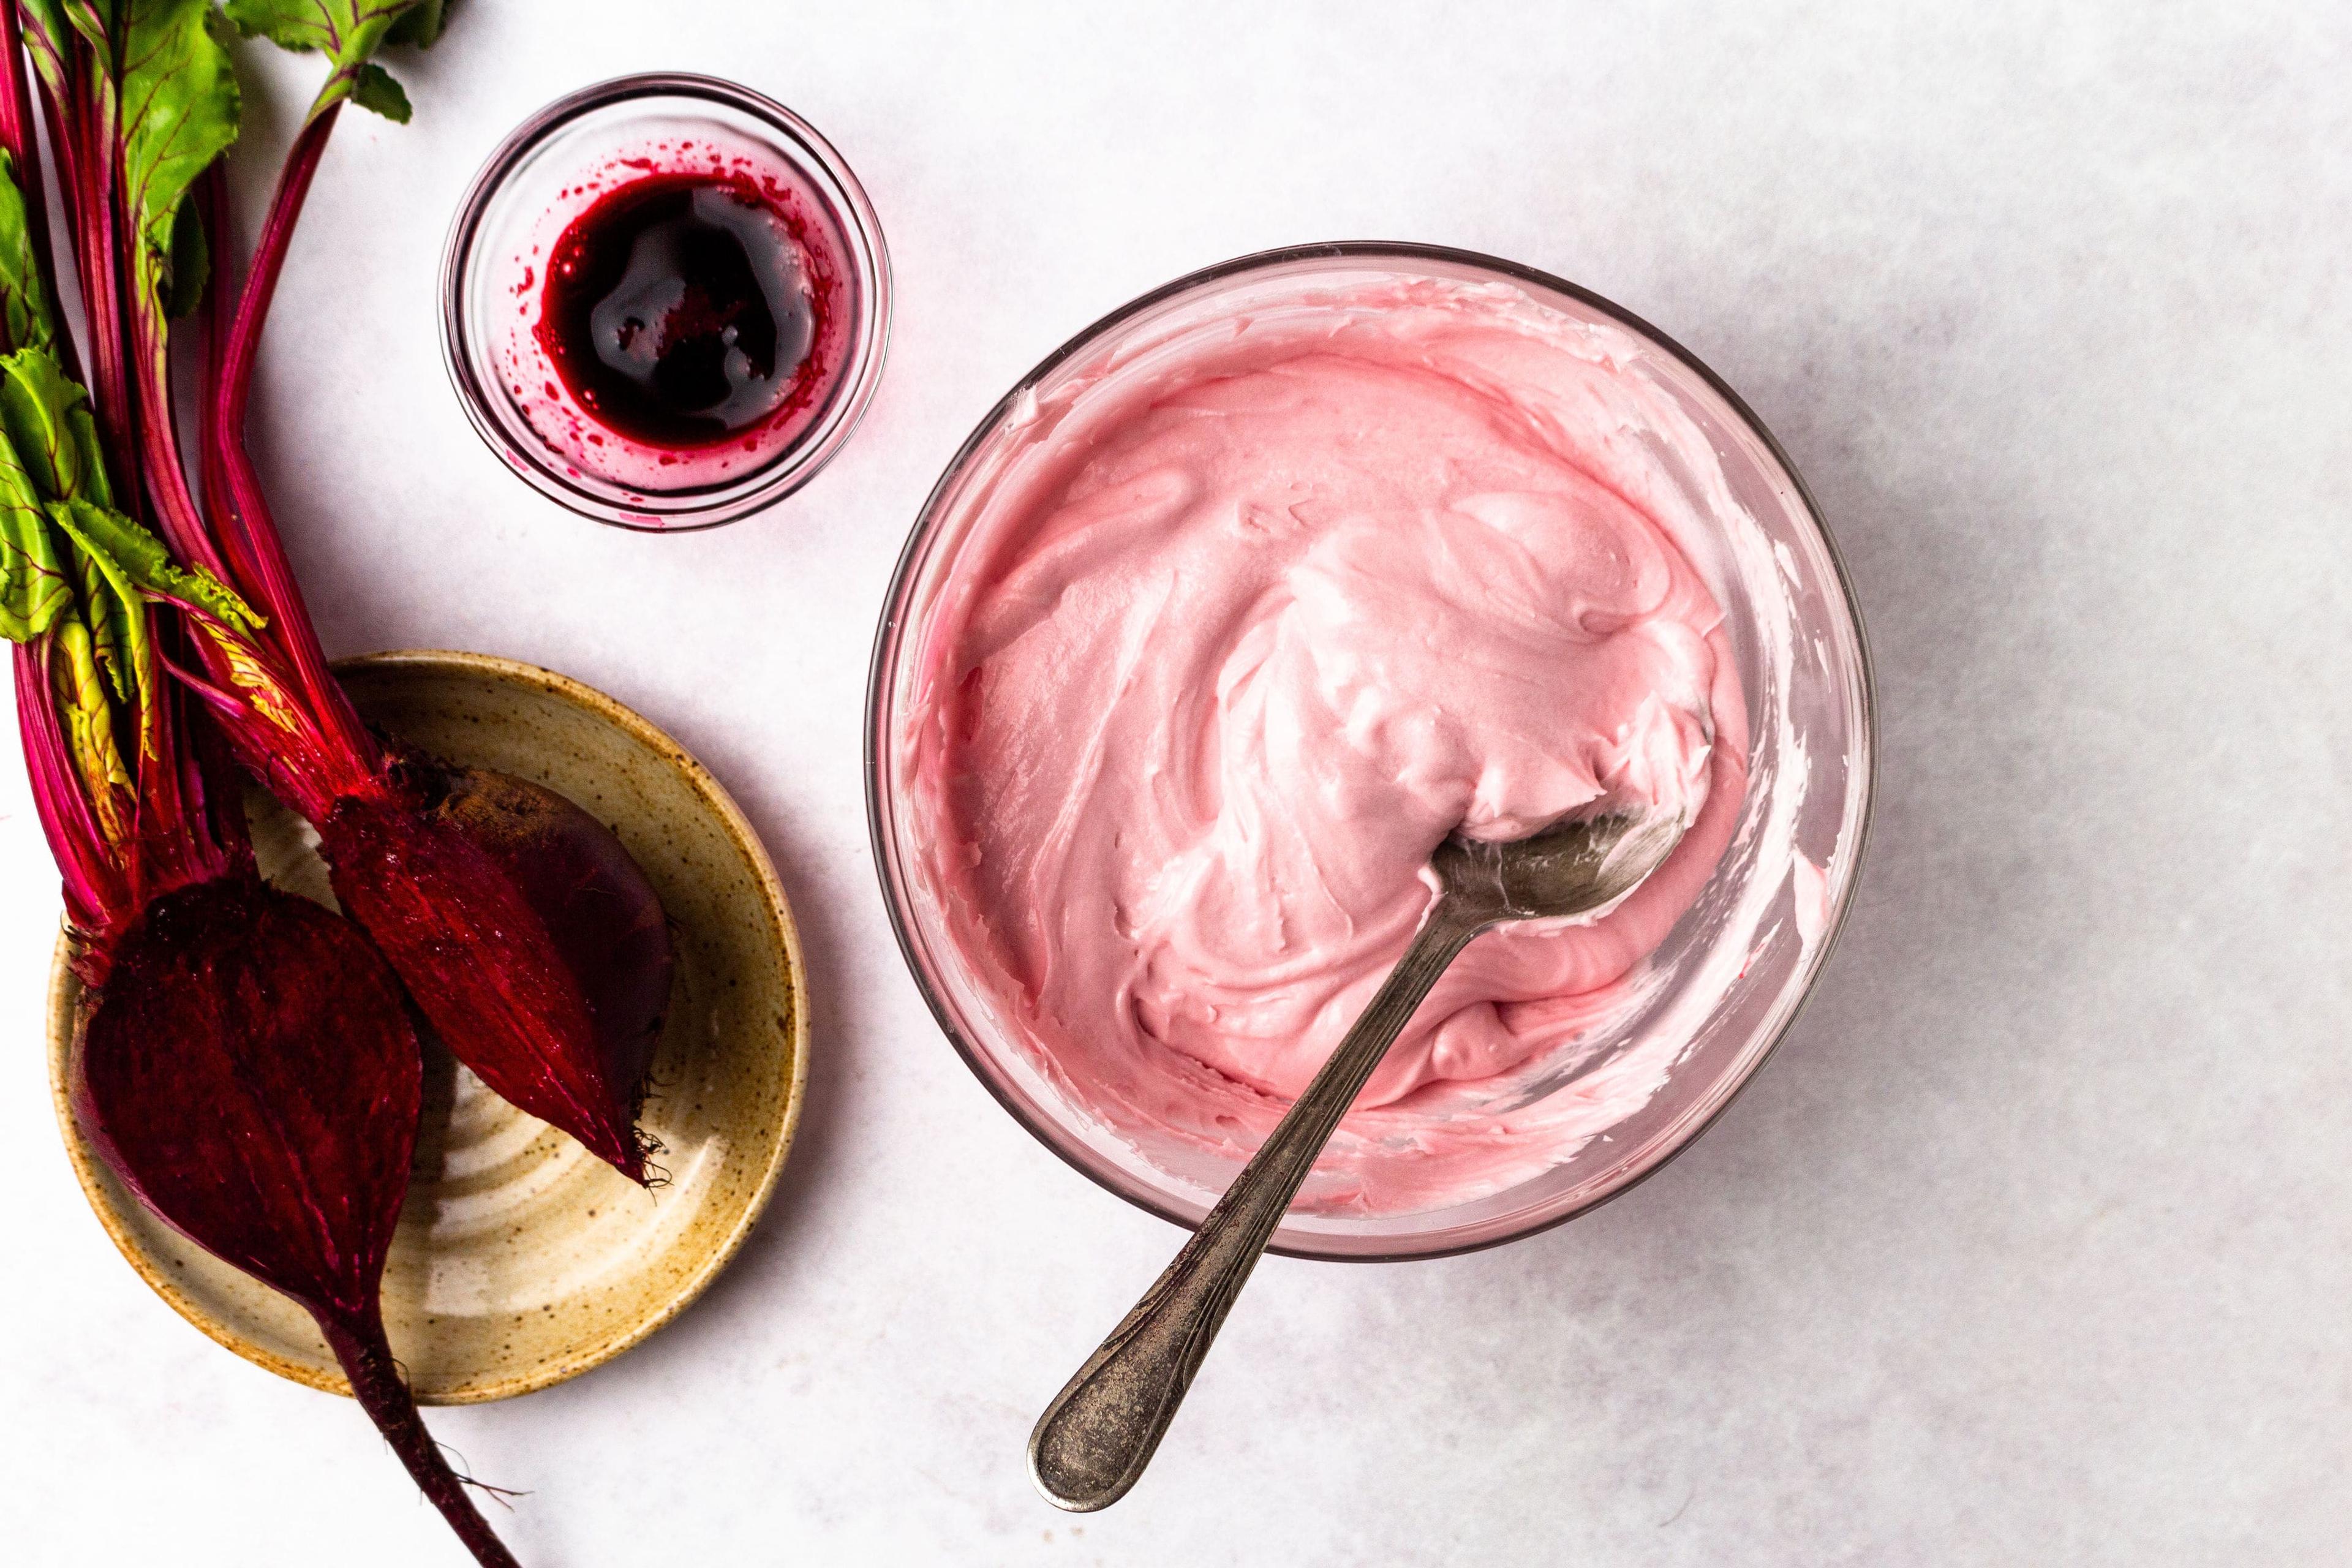 Beet juice is used to naturally color frosting.